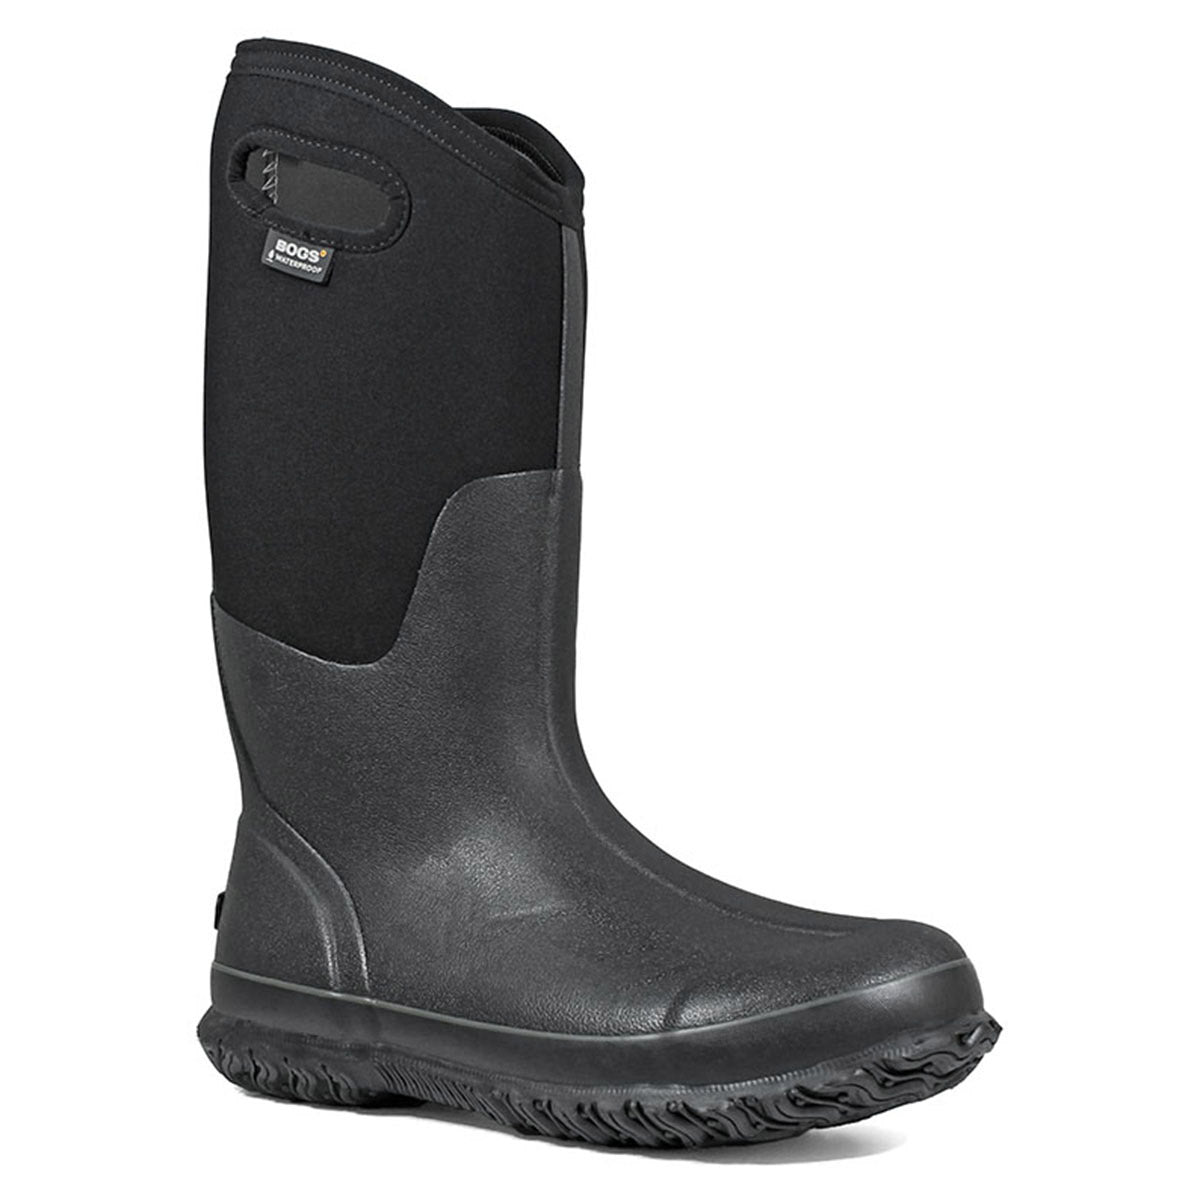 Bogs Classic Tall Black - Women's waterproof boot with neoprene shaft and rubber outsole.